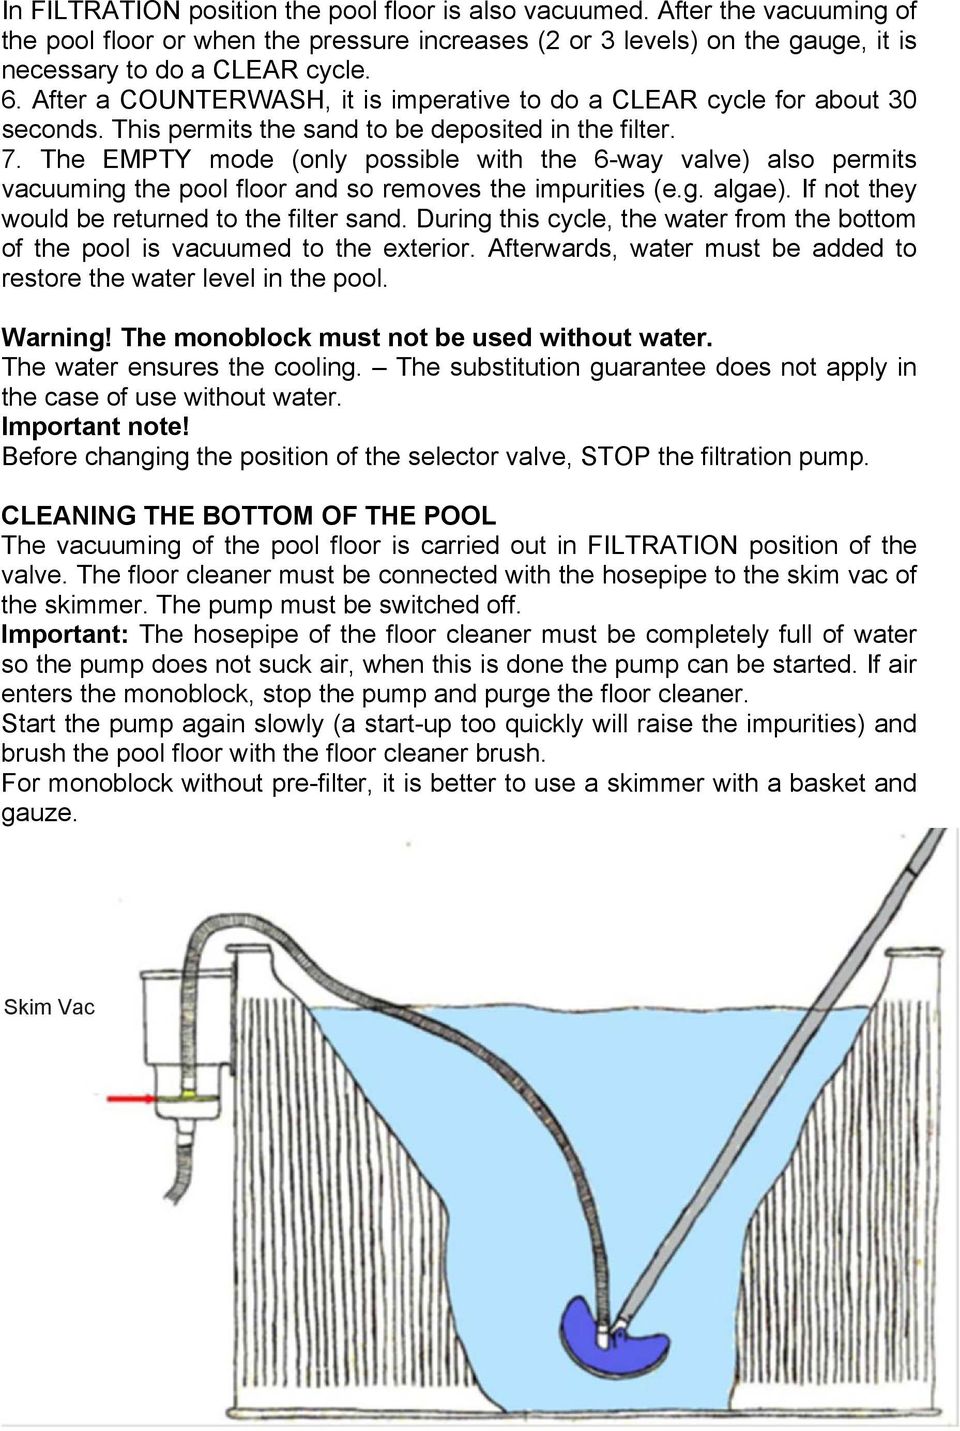 The EMPTY mode (only possible with the 6-way valve) also permits vacuuming the pool floor and so removes the impurities (e.g. algae). If not they would be returned to the filter sand.